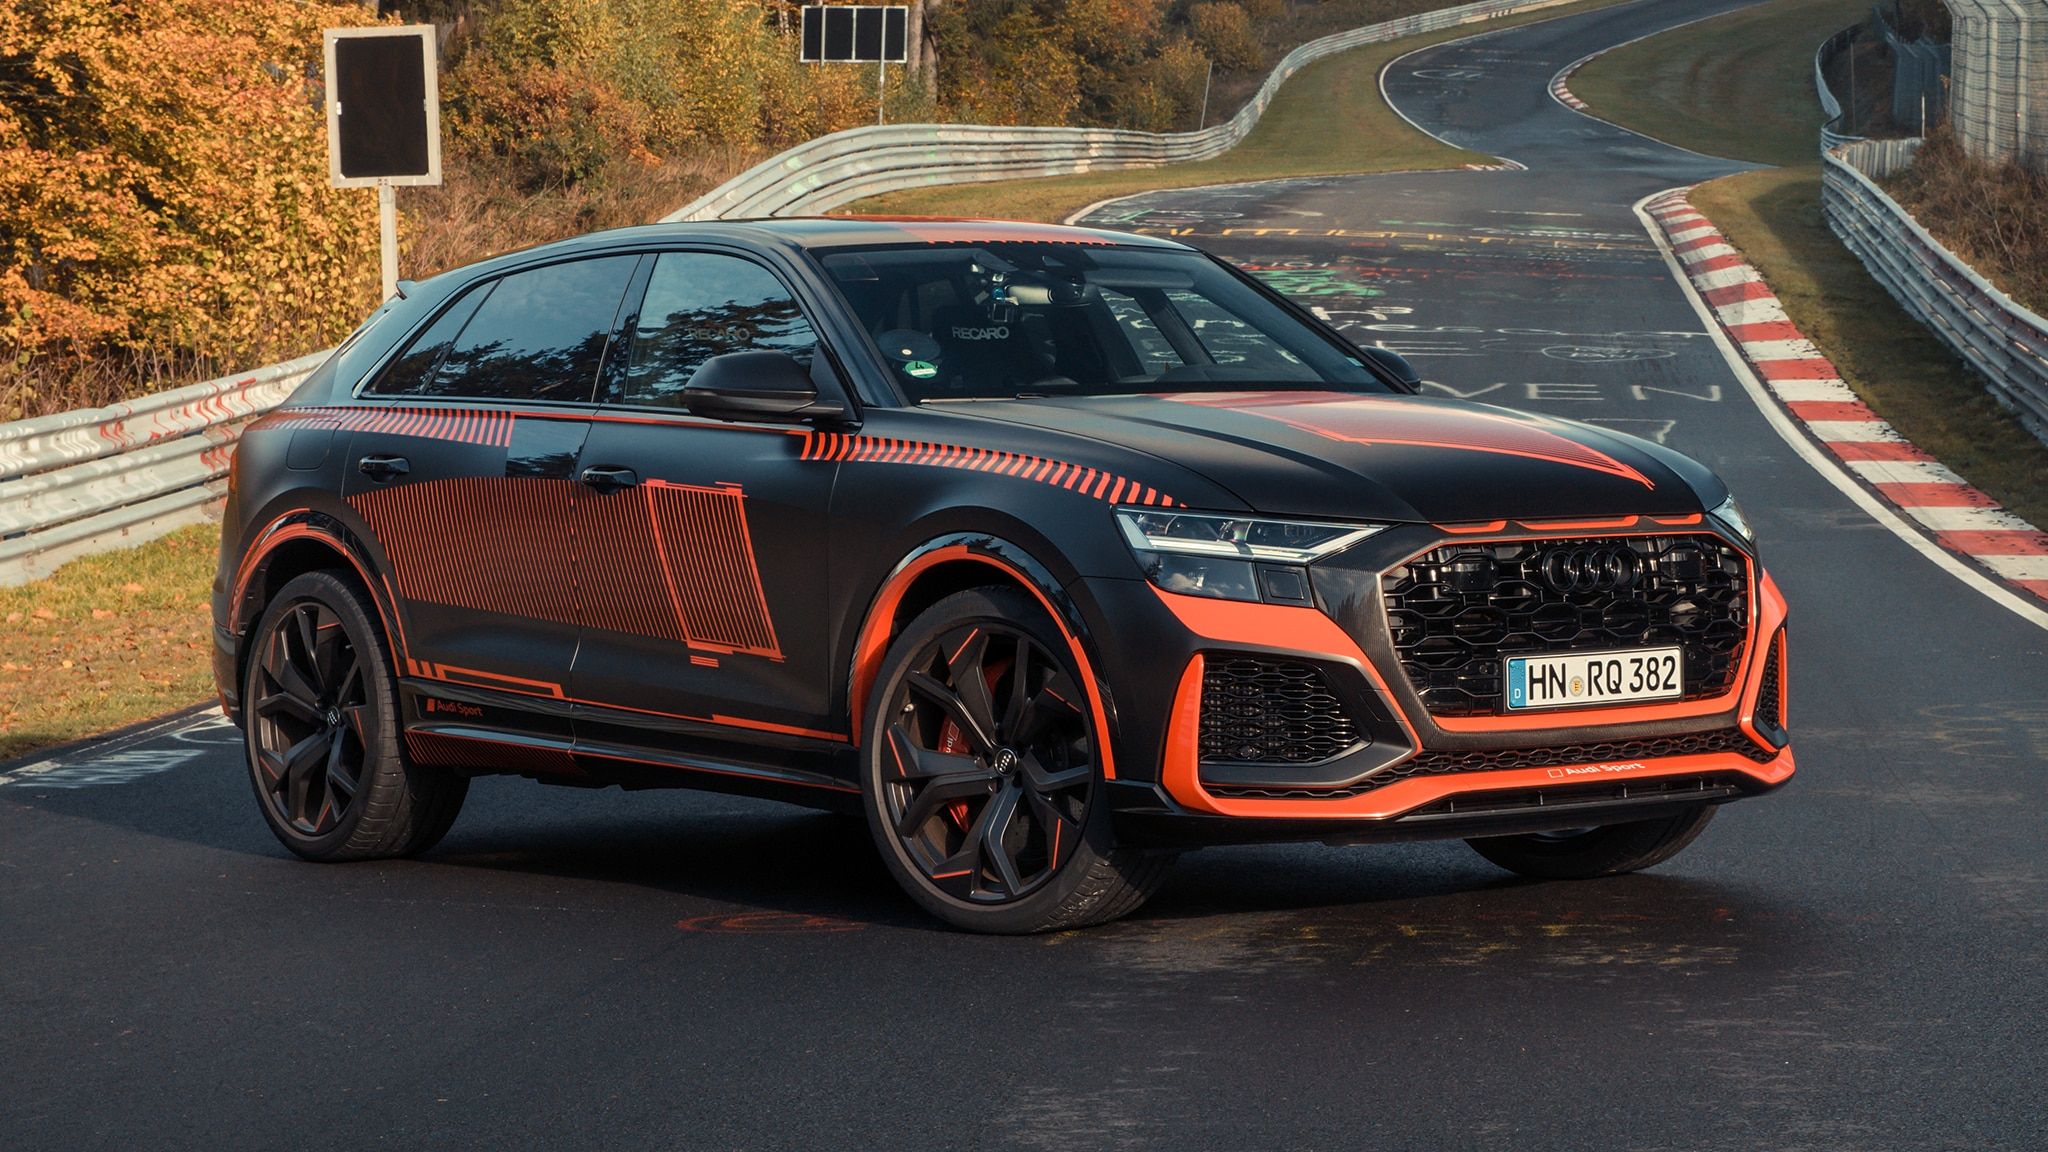 Audi RS Q8 First Ride: On The Nurburgring In Audi's Upcoming Near 600 HP SUV